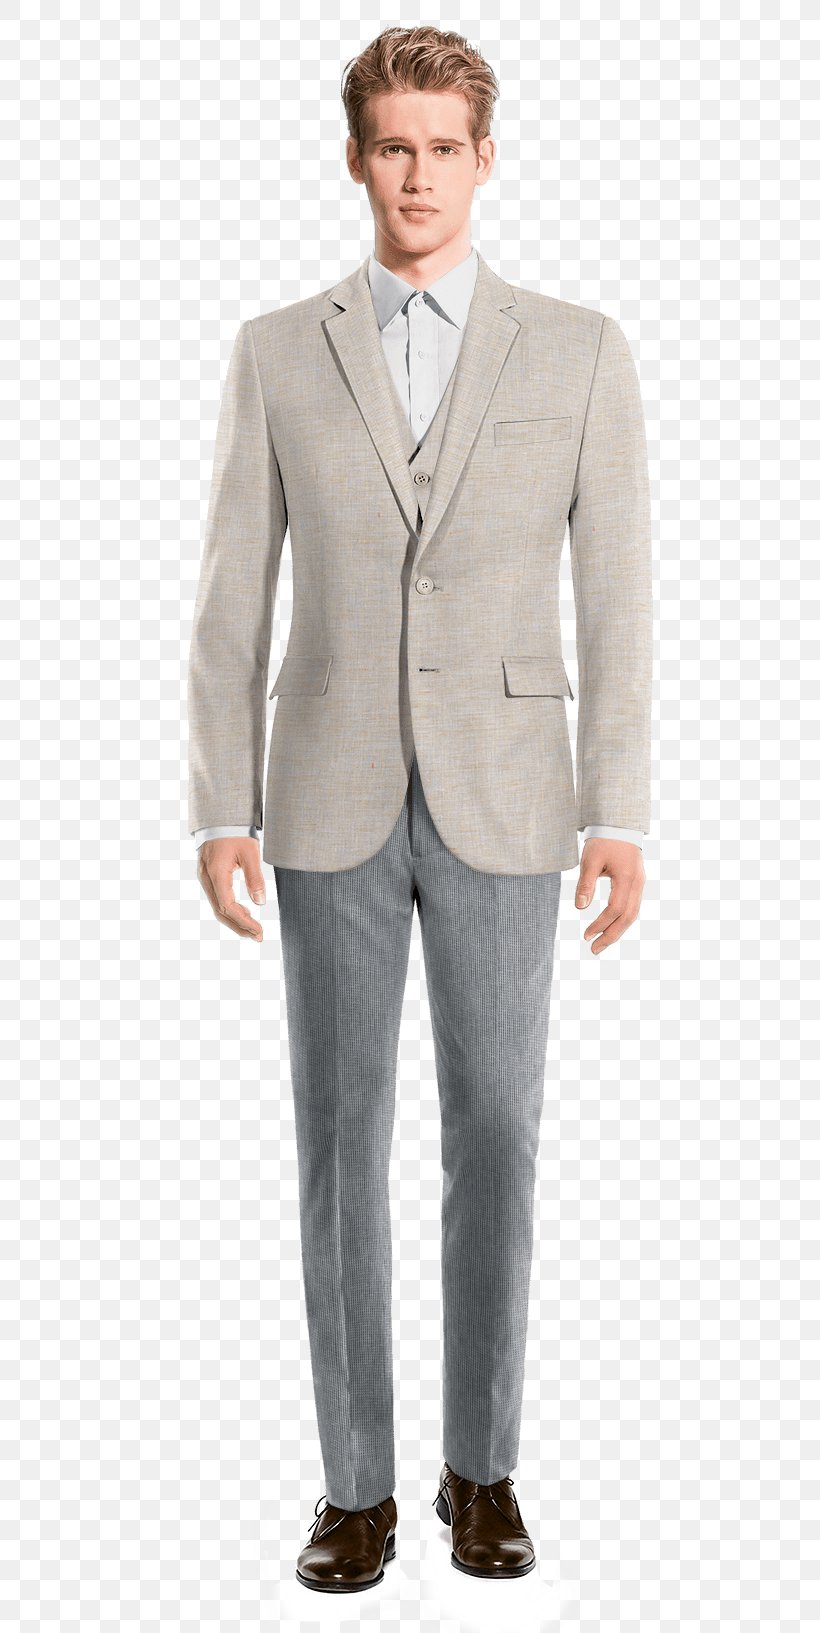 Suit Chino Cloth Pants Tweed Shoe, PNG, 600x1633px, Suit, Blazer, Chino Cloth, Clothing, Formal Wear Download Free